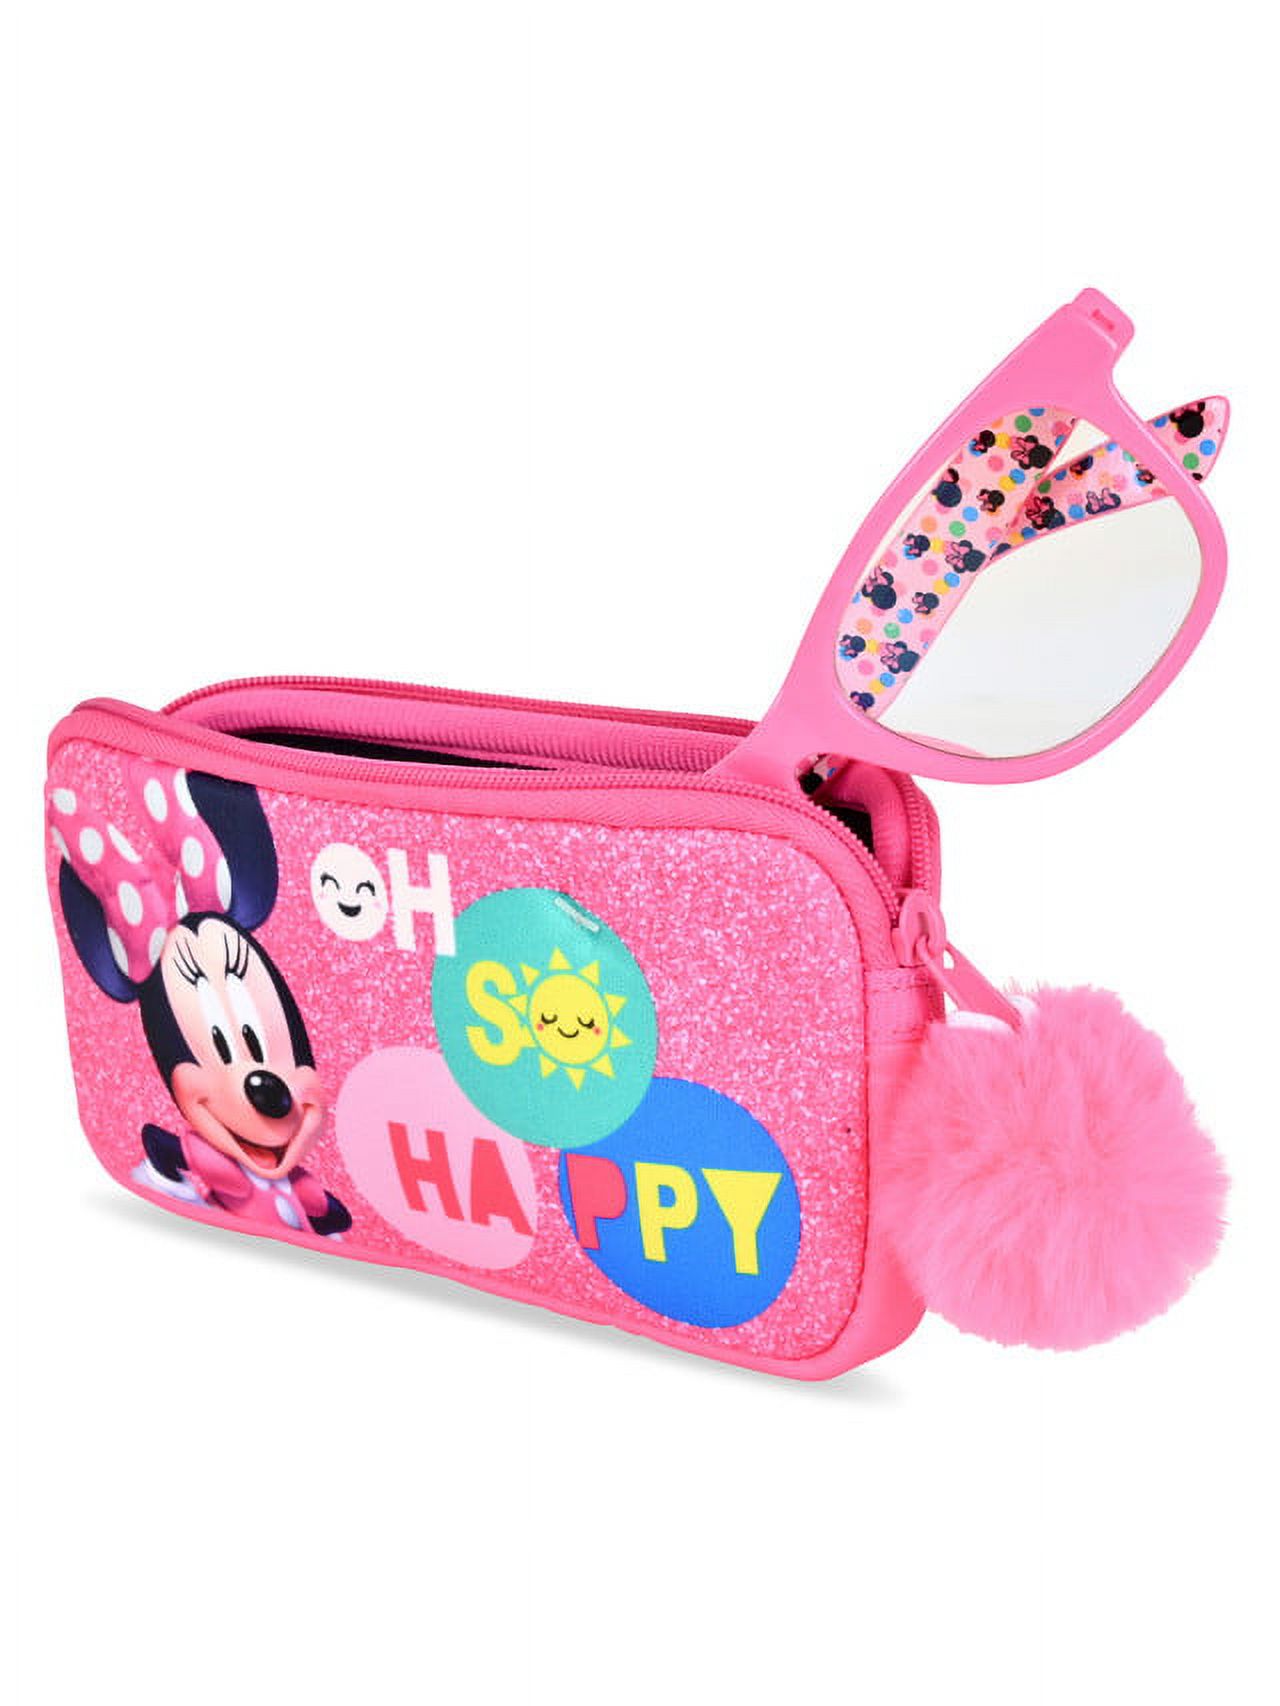 Minnie Mouse Blue Light Blocking Glasses for Boys with Zippered Case - image 2 of 5